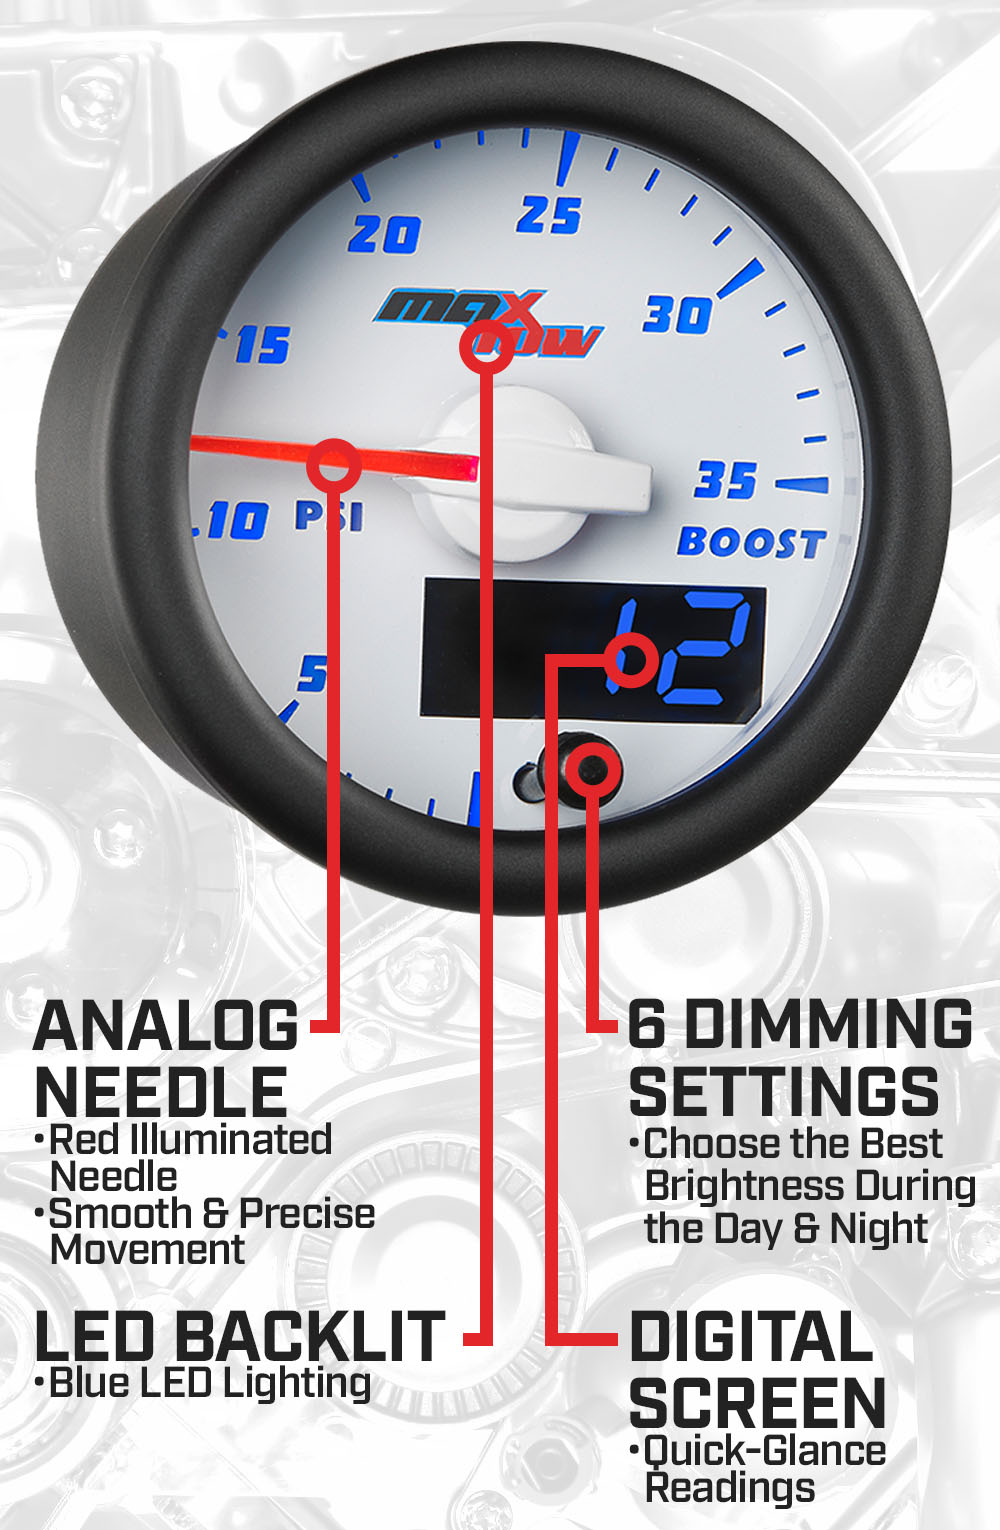 White & Blue Double Vision 35 PSI Boost Gauge Features